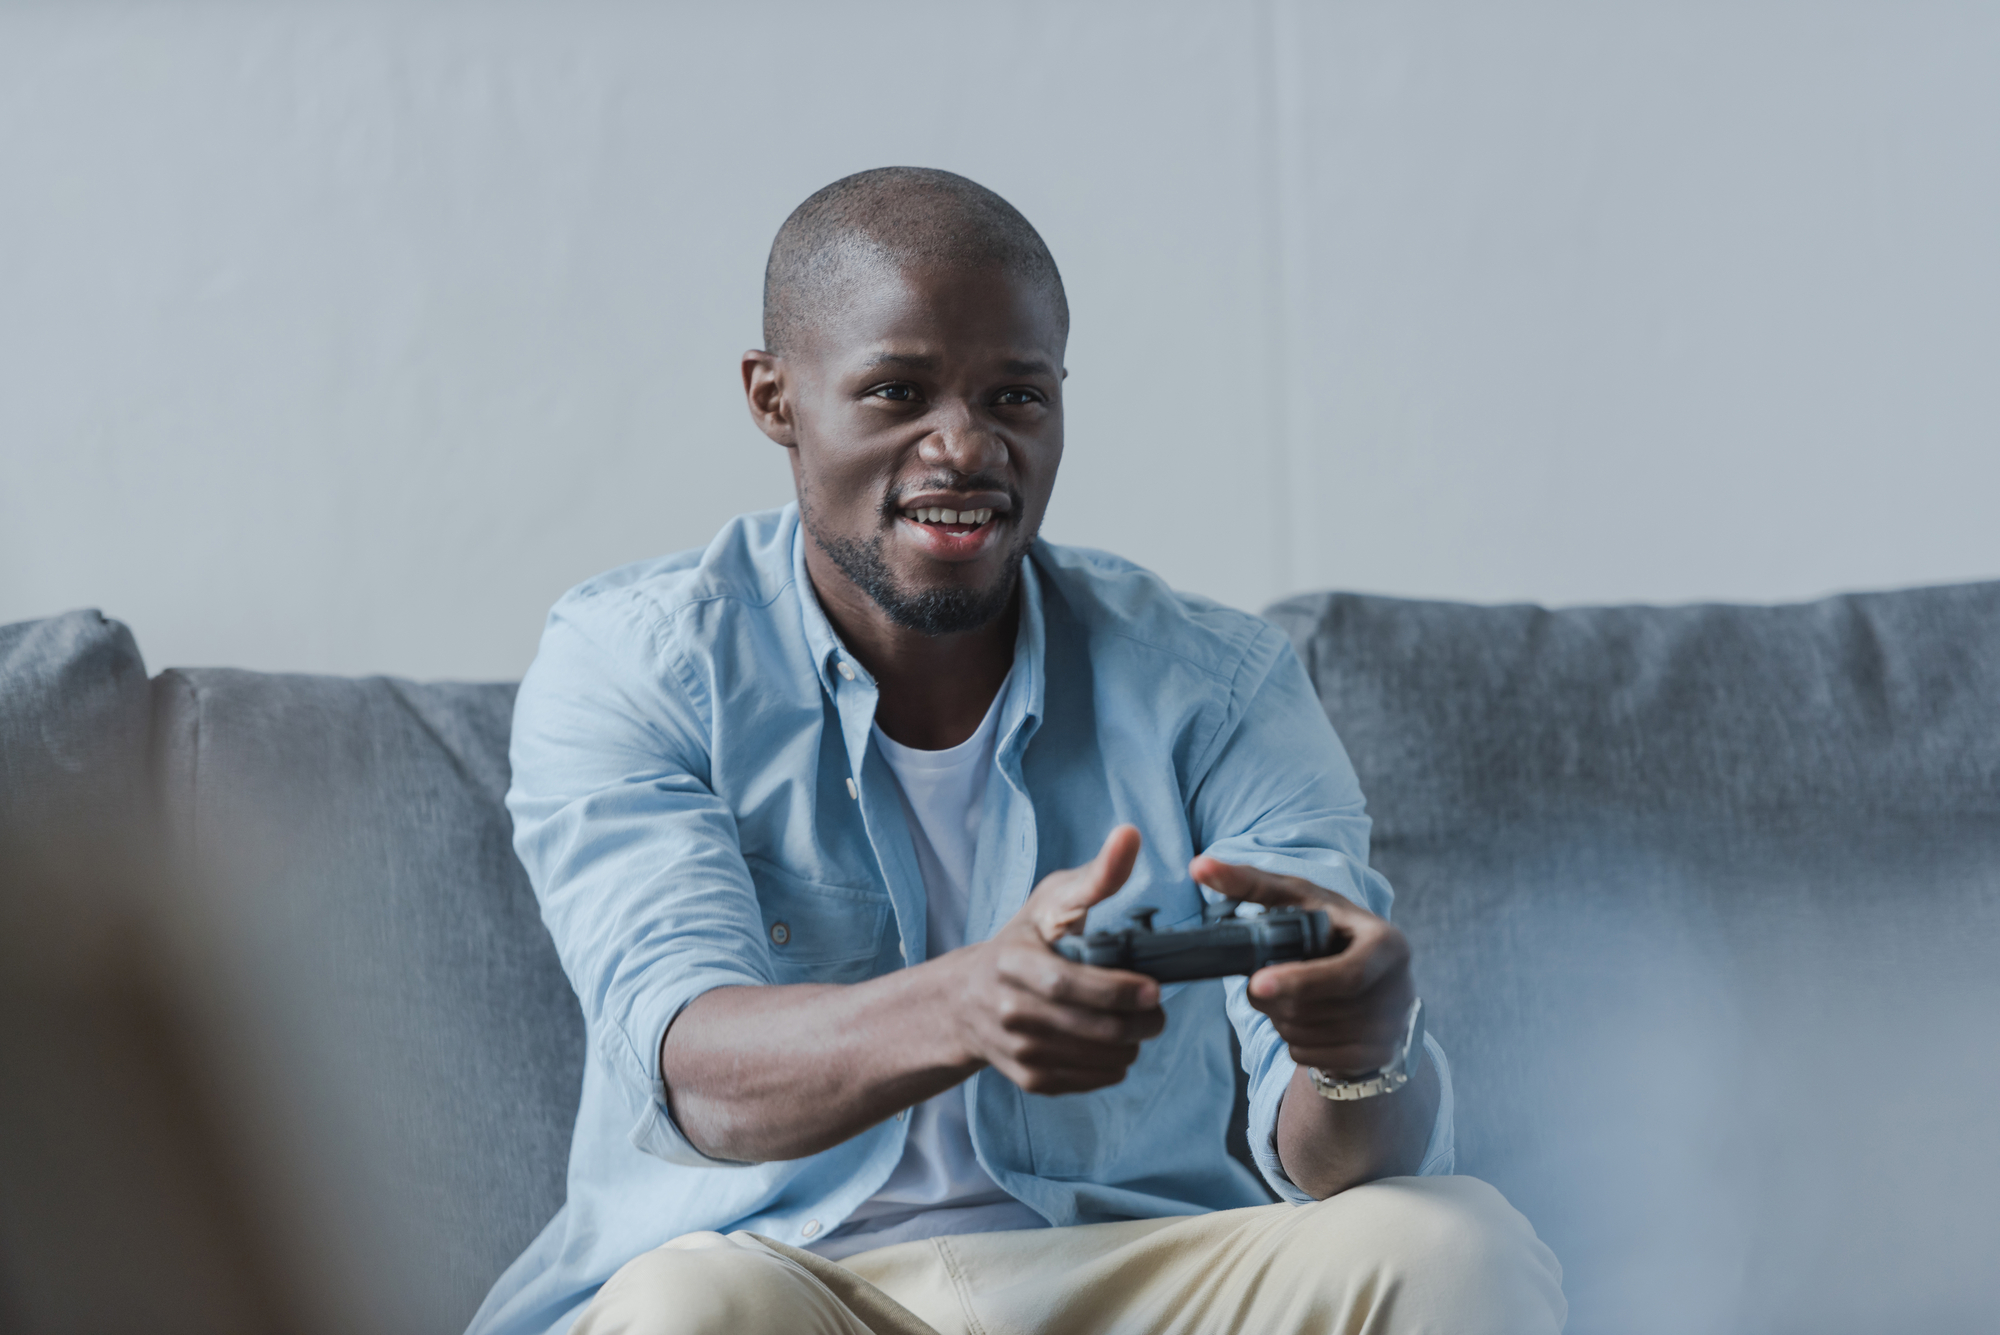 A man sitting on a couch, getting paid to play video games with the controller in his hand.